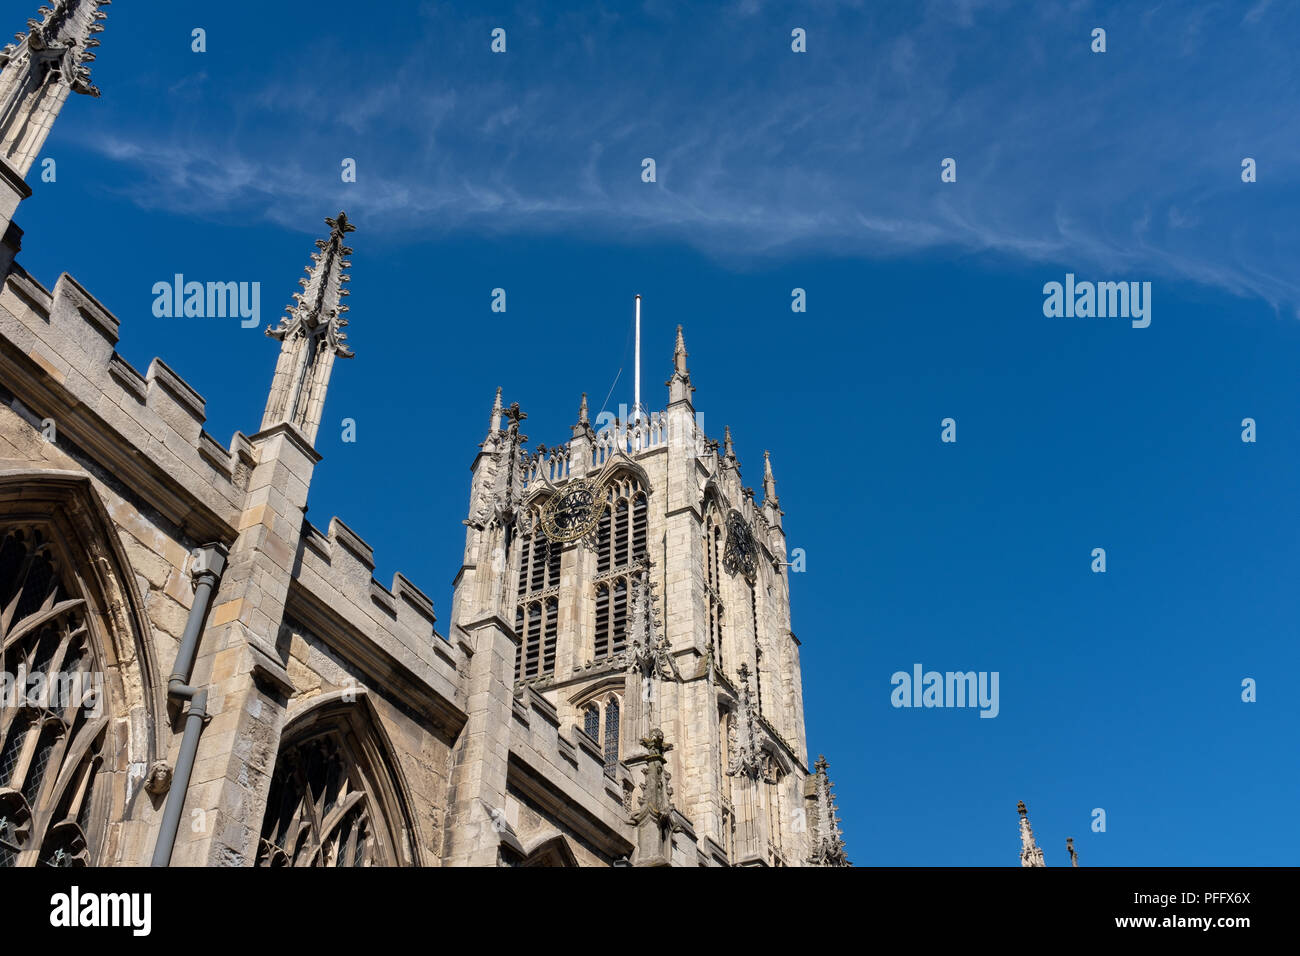 Image of Kingston Upon Hull UK City of Culture 2017. Shown is the former Holy Trinity Church now called Hull Minster taken against a blue sky. Stock Photo